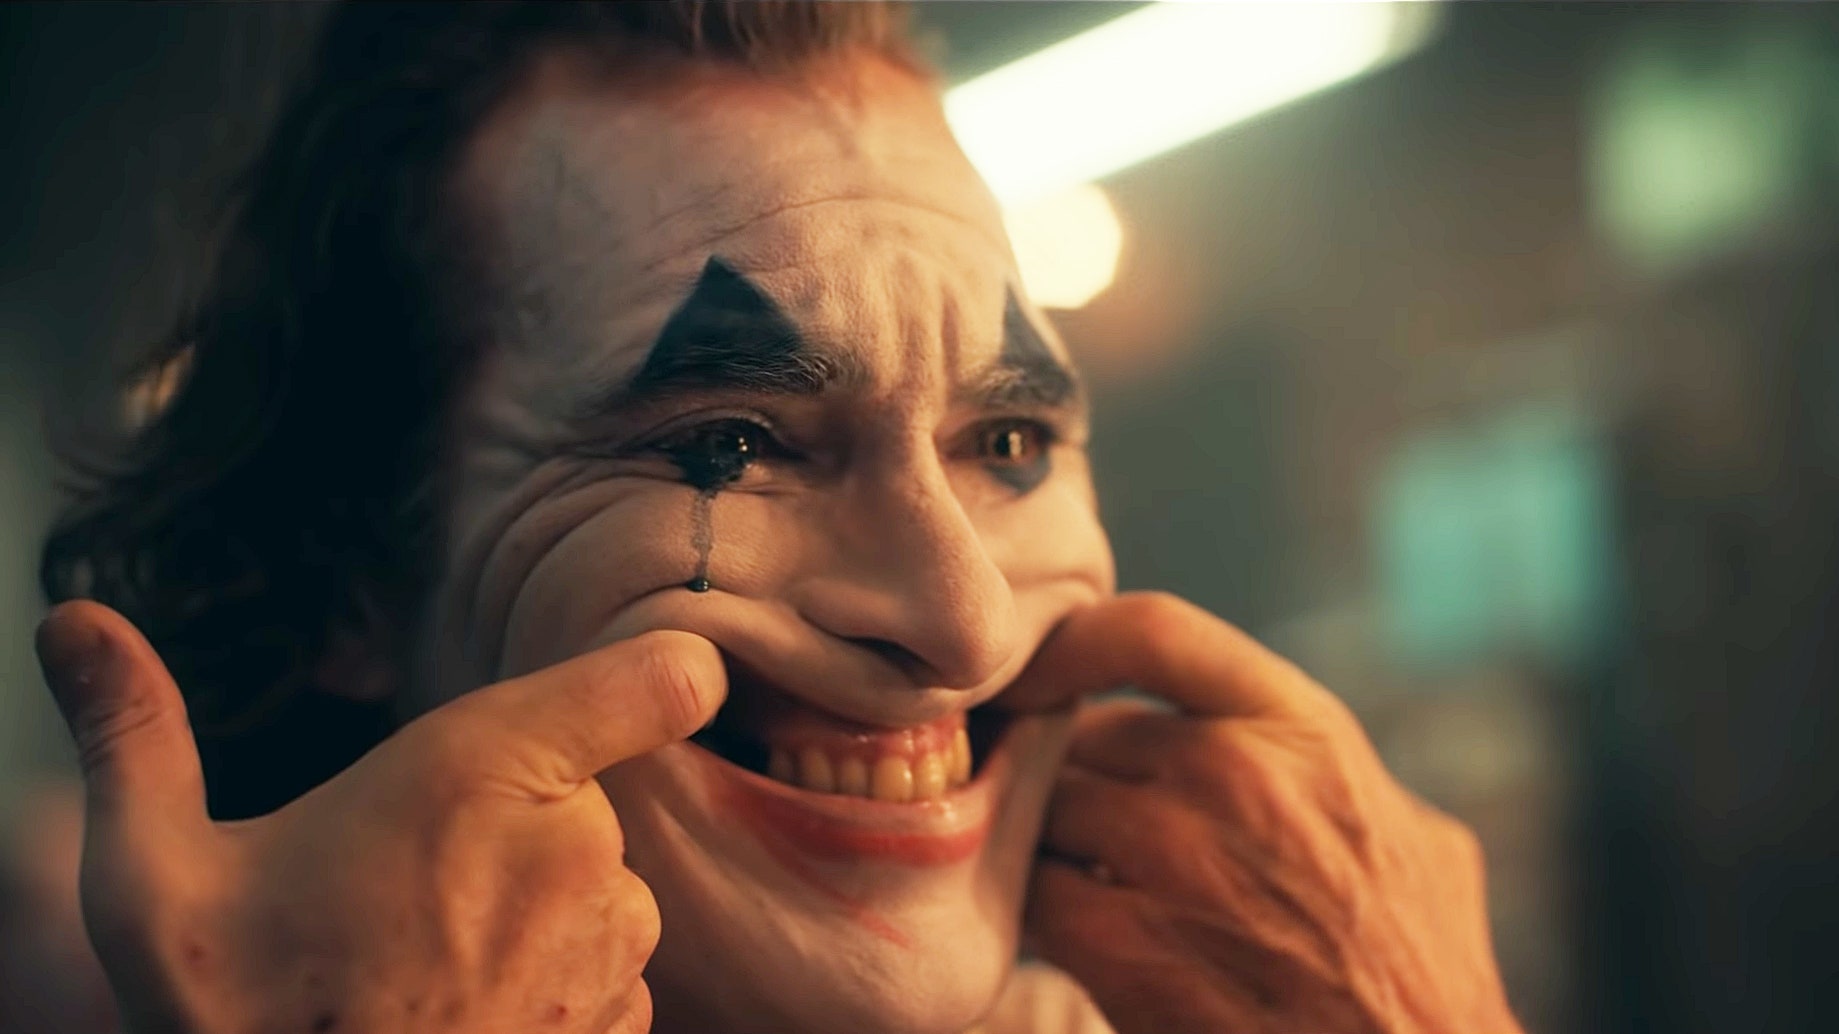 The 'JOKER' Trailer Will Put a Smile on Your Face | GQ'JOKER' Trailer Will Put a Smile on Your Face | GQ